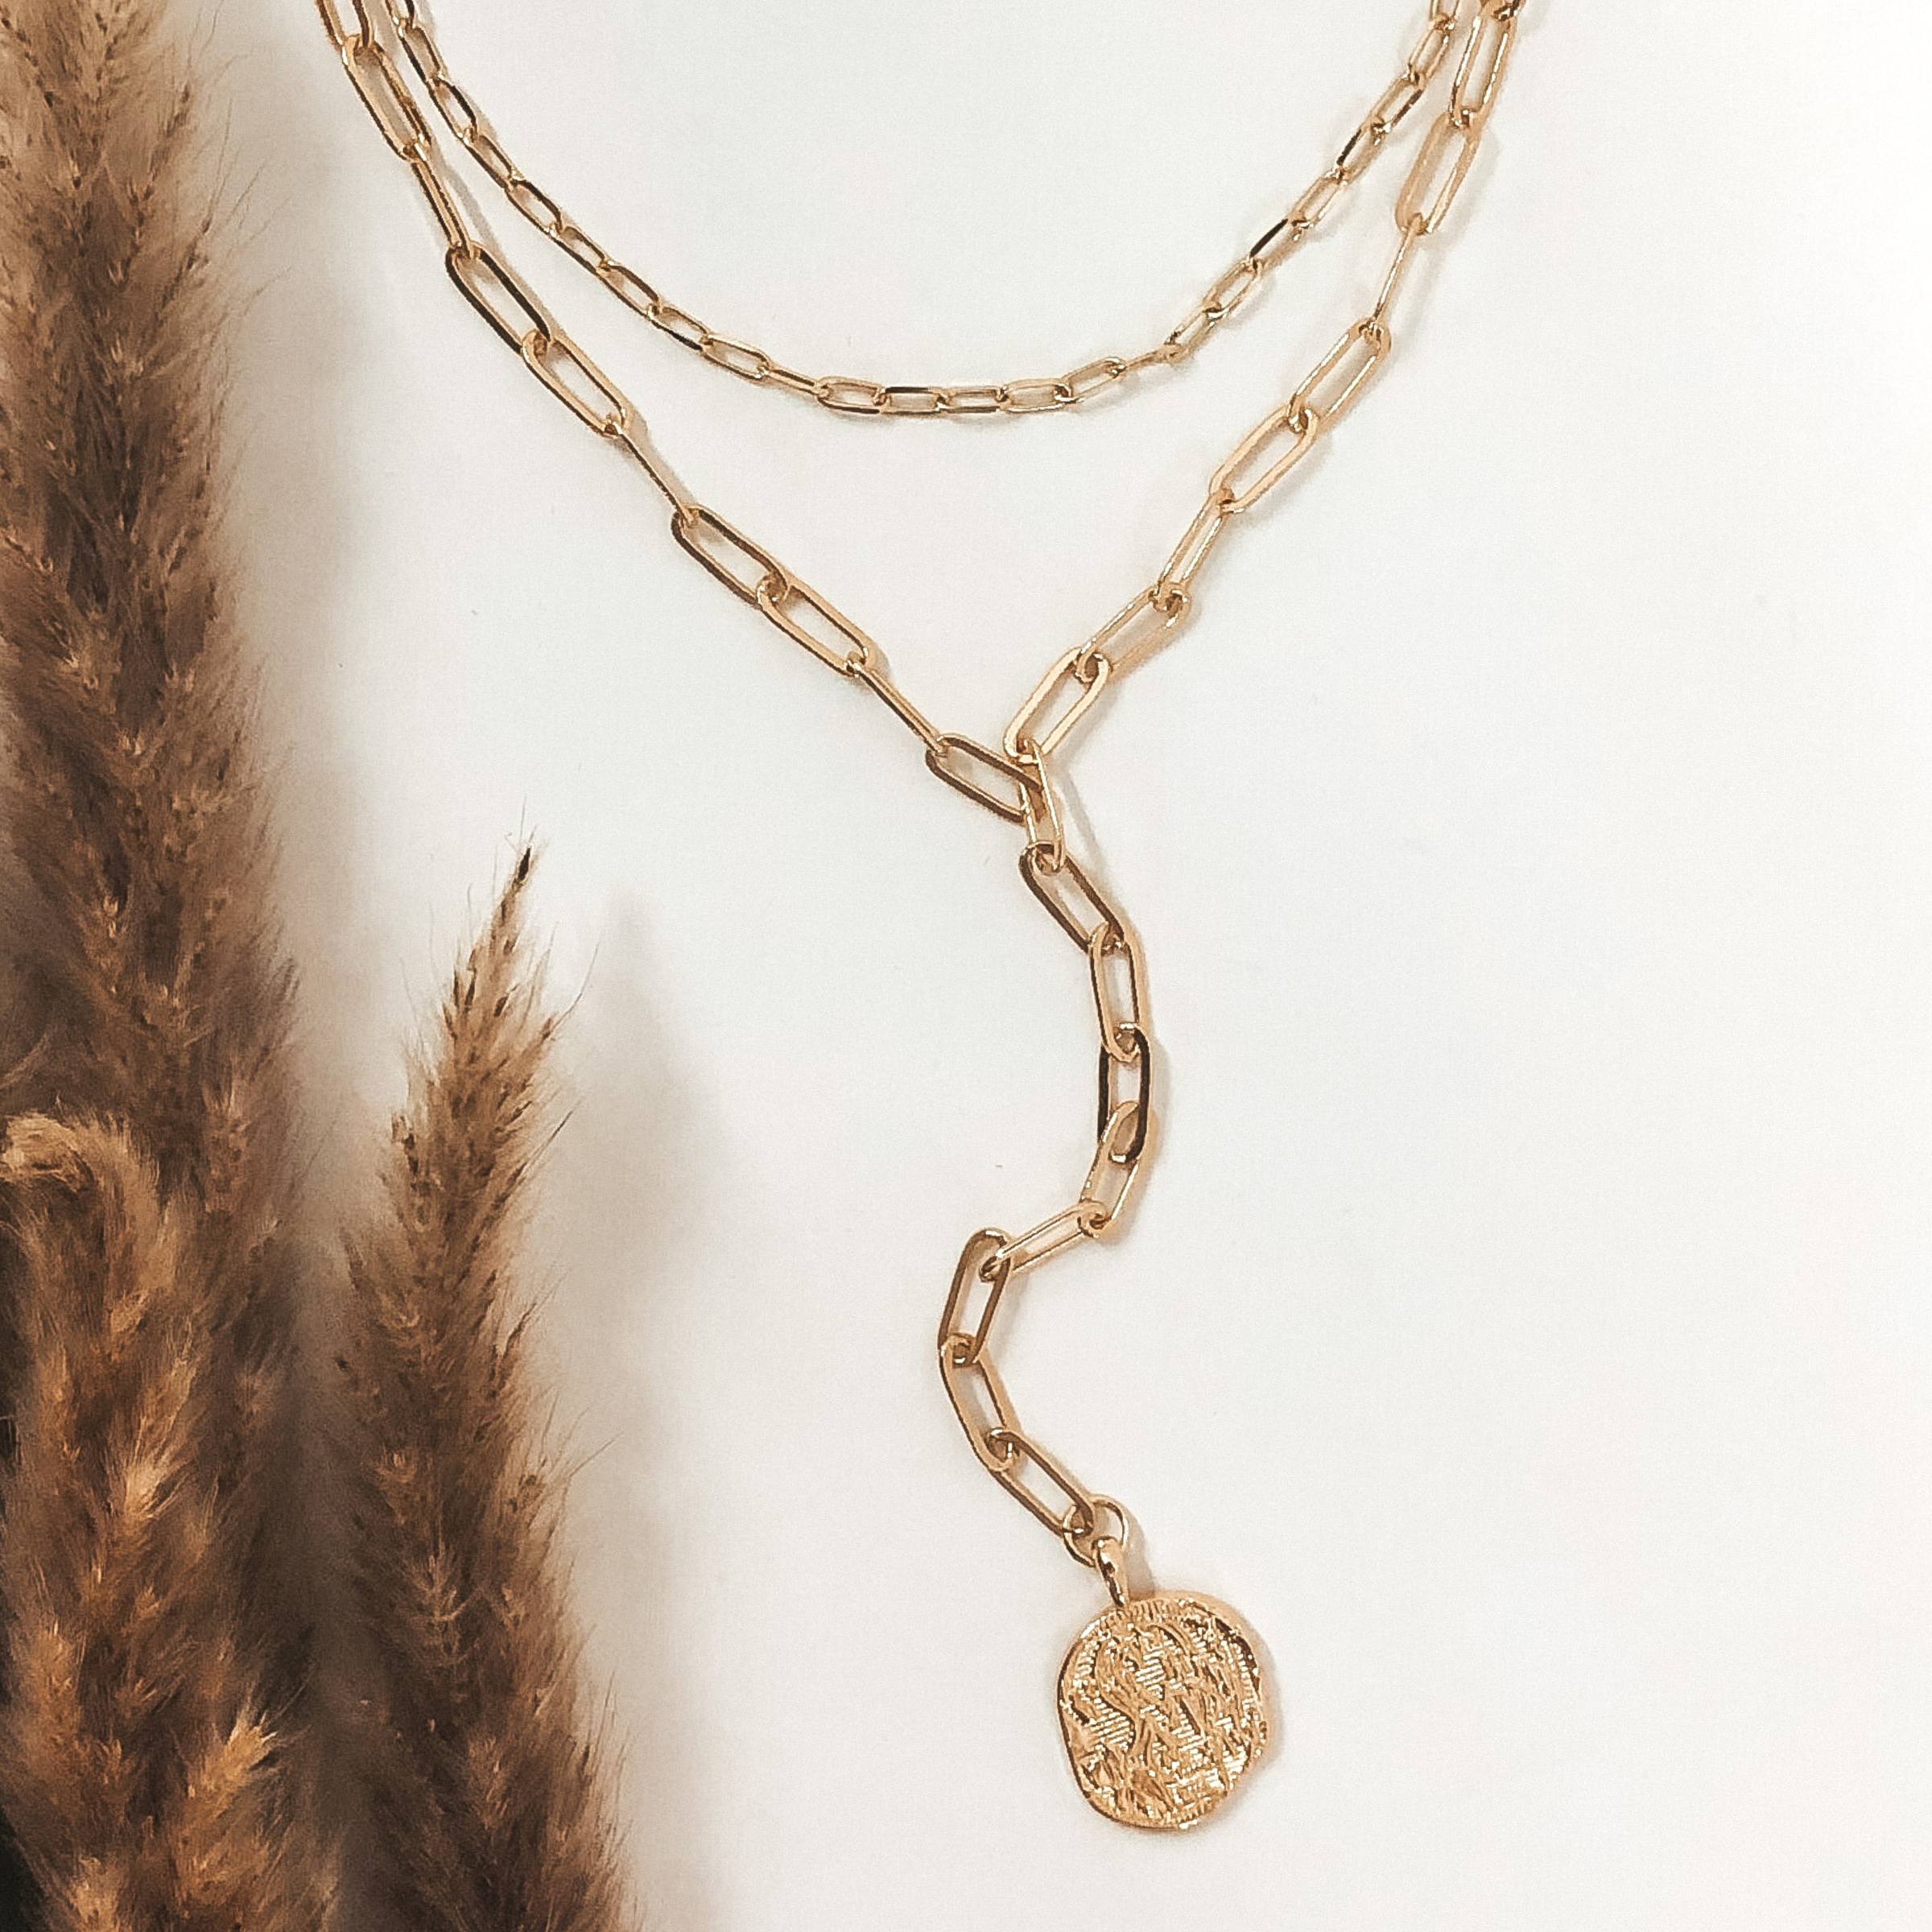 Two Strand Multi Chain Lariat Style Necklace with Coin in Gold - Giddy Up Glamour Boutique